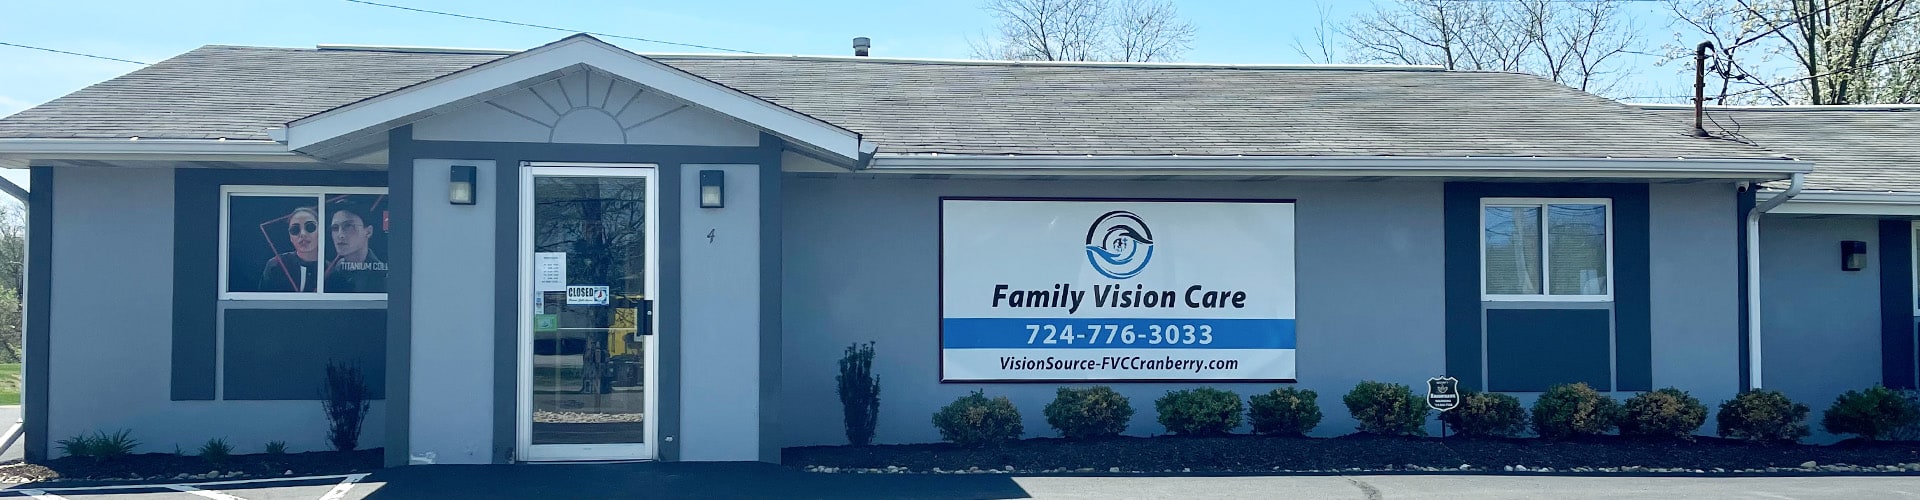 Outside of the Family Vision Care Cranberry Township location